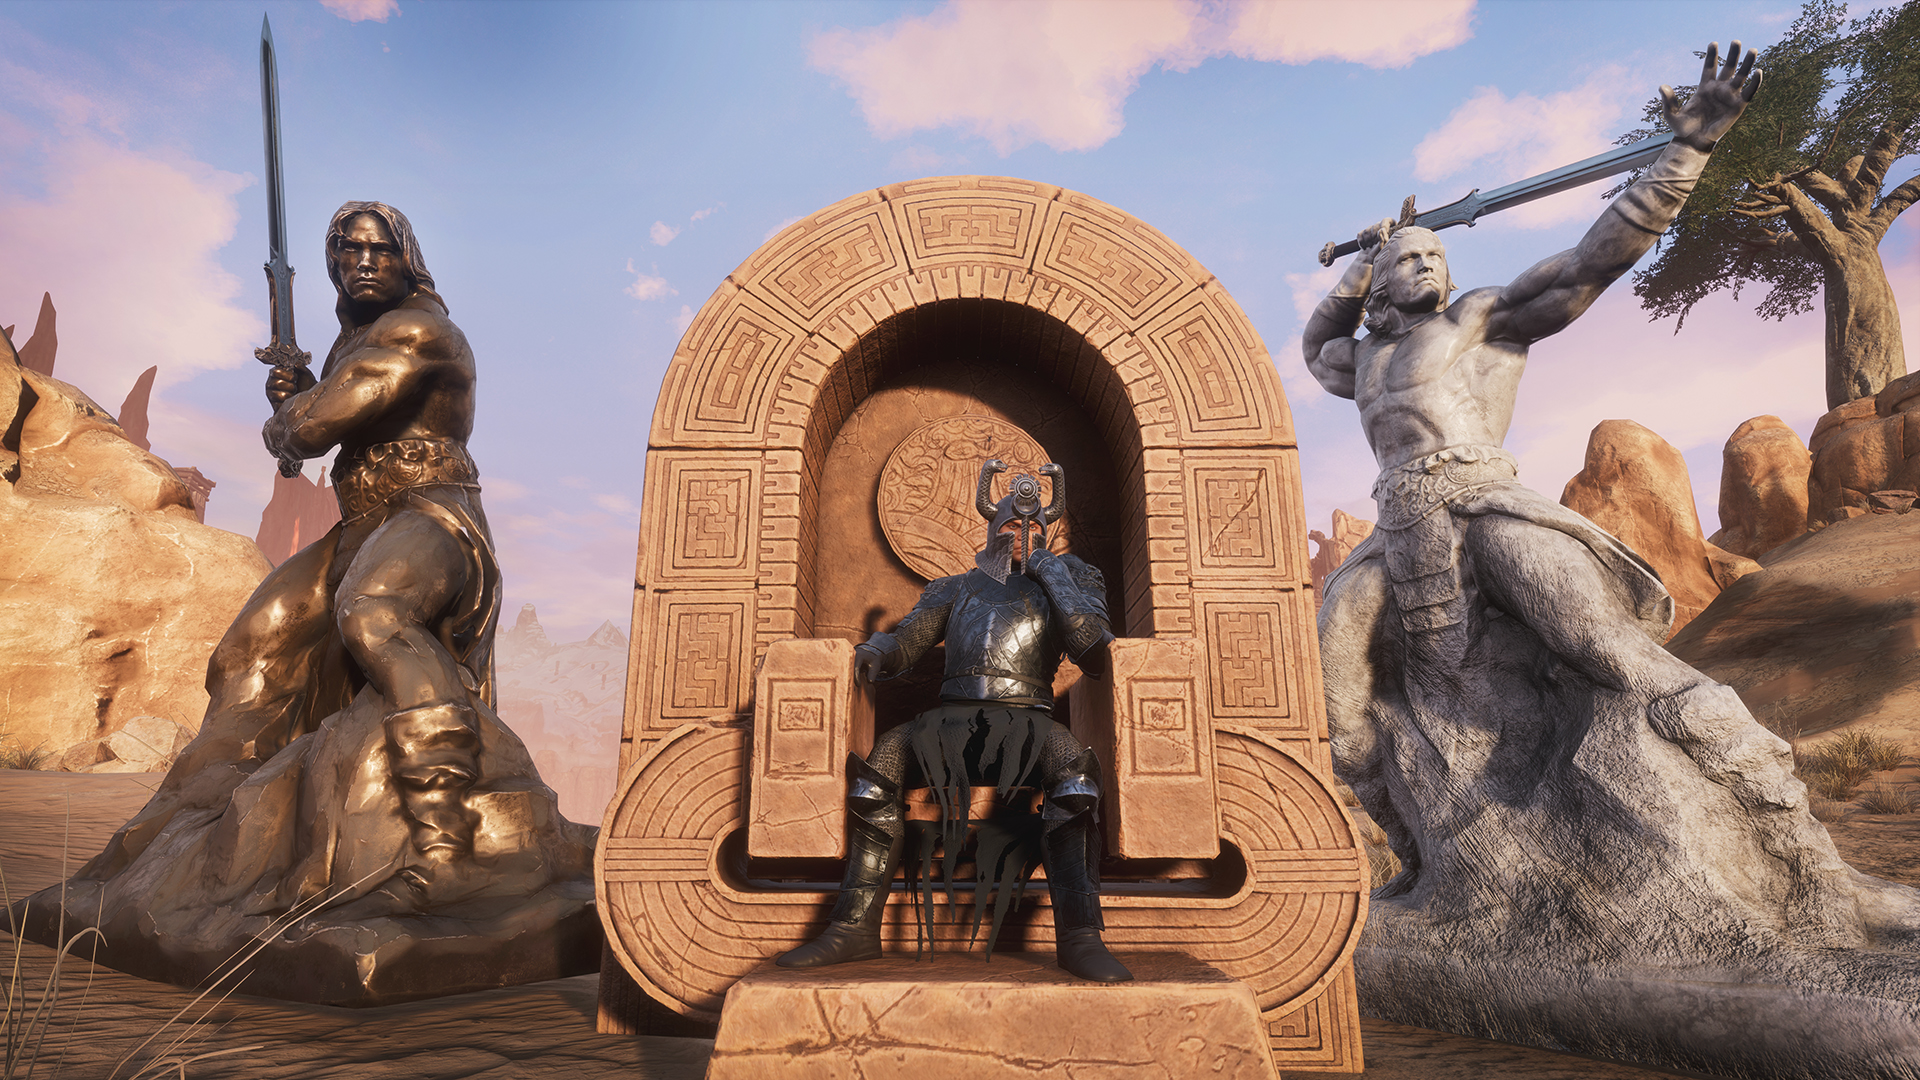 Conan Exiles - The Riddle of Steel Featured Screenshot #1